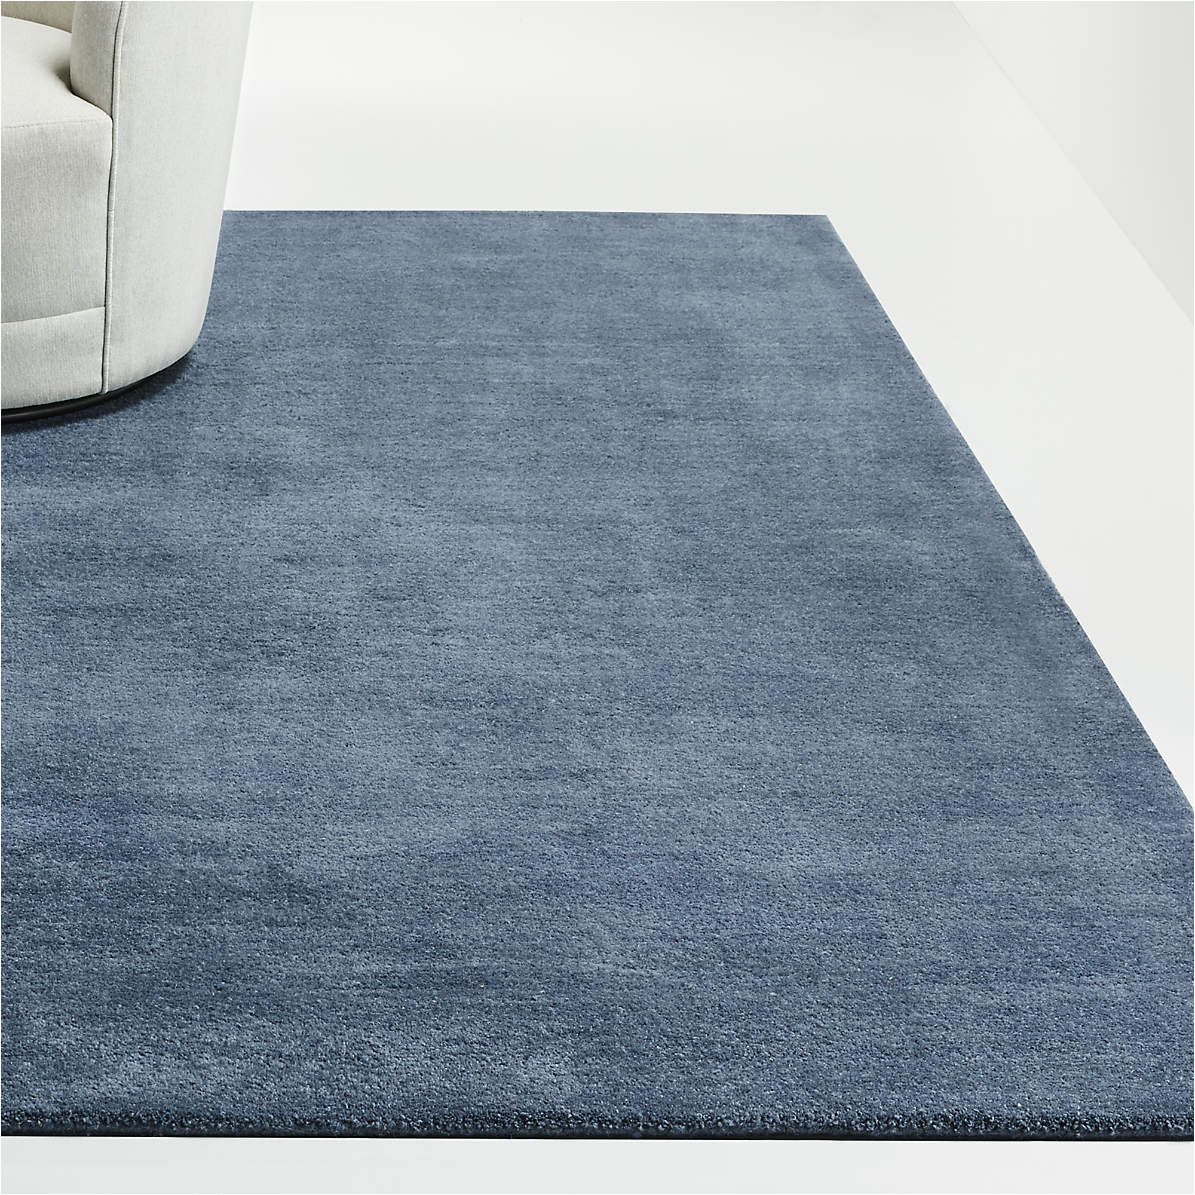 Crate and Barrel Round area Rugs Baxter Blue Wool area Rug Crate & Barrel